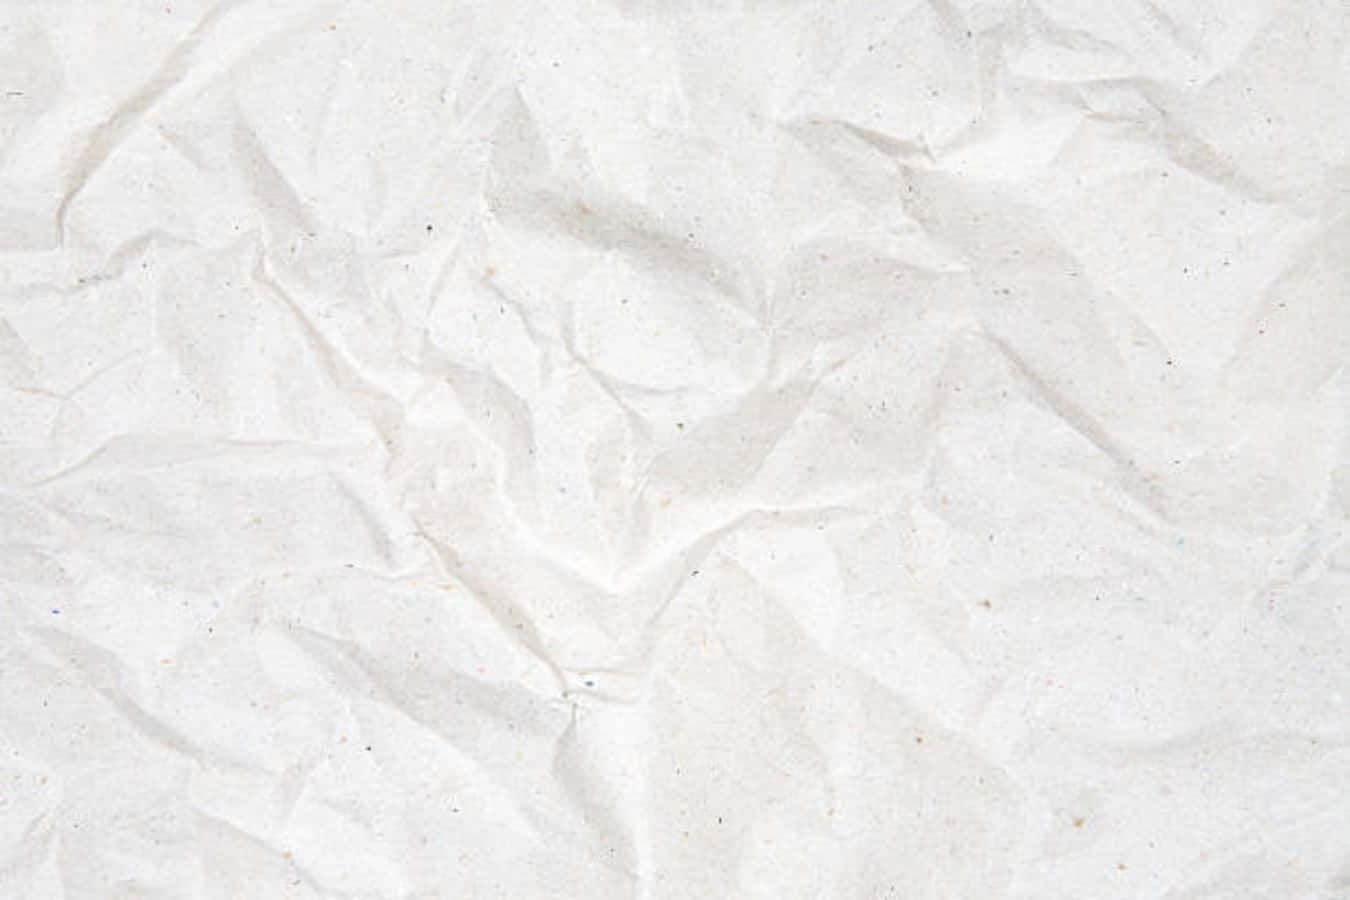 A White Paper Texture With A Few Creases